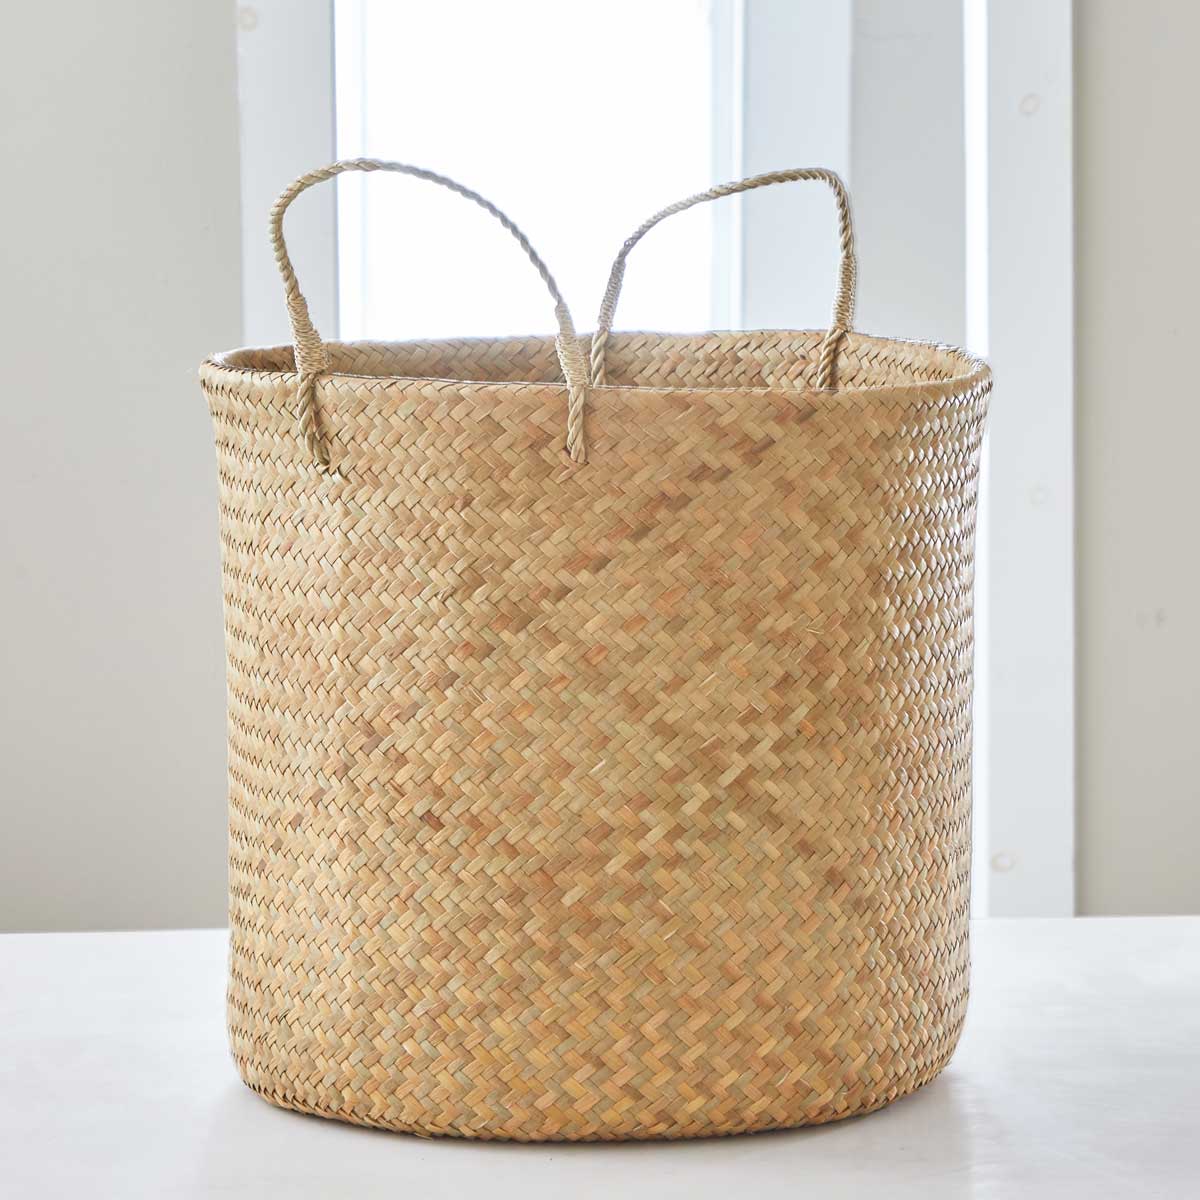 HANDWOVEN BASKETS with BRAIDED HANDLES